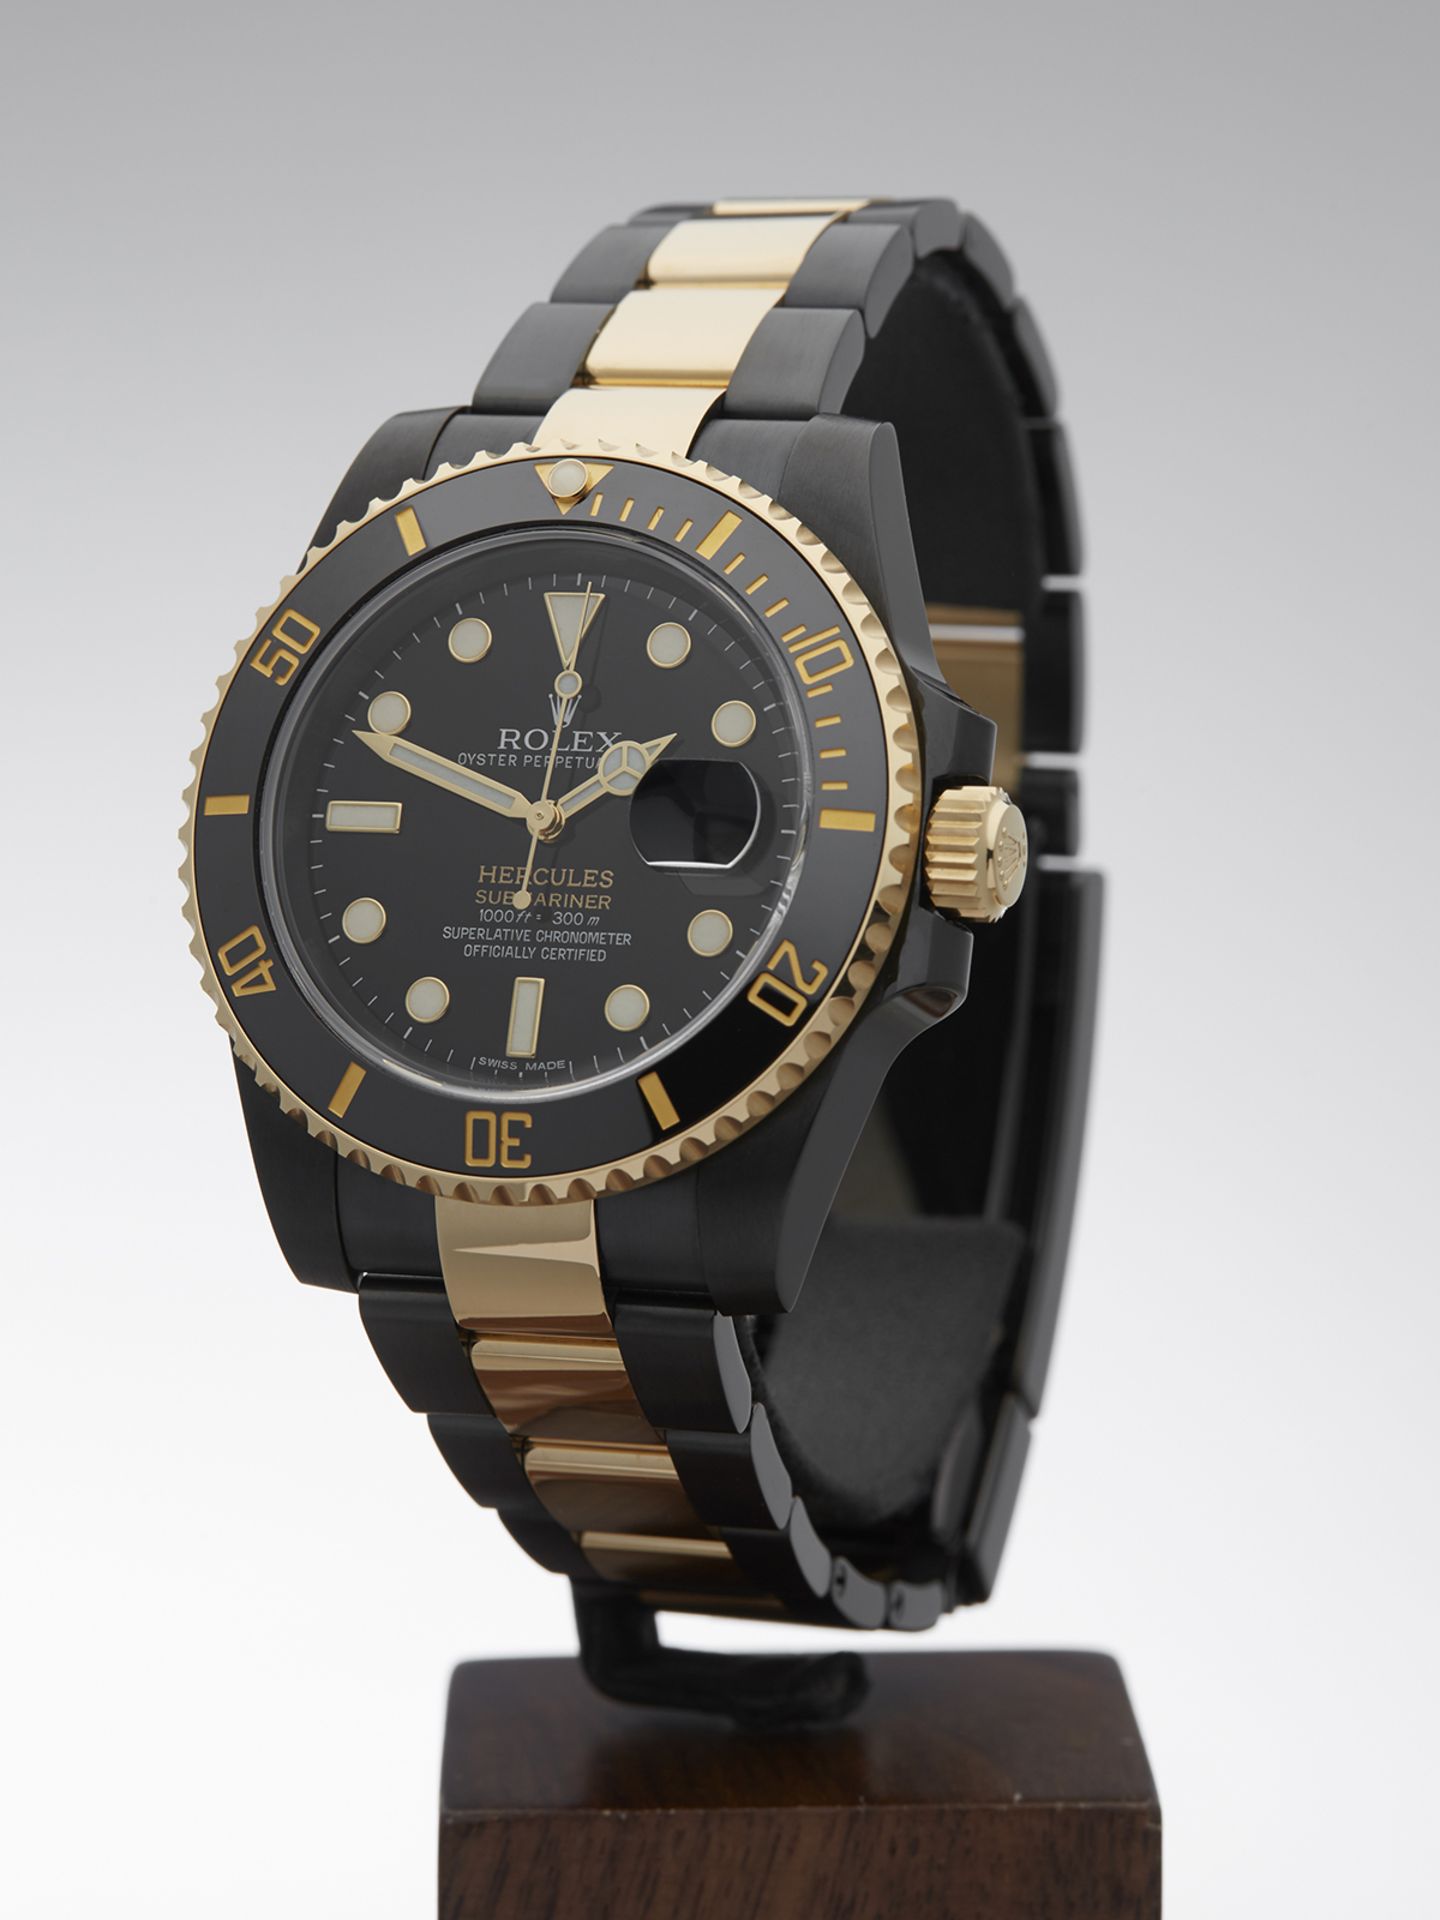 Rolex Submariner Hercules Custom Gold/DLC 40mm ADLC Coated Stainless Steel & 18k Yellow Gold - Image 2 of 9